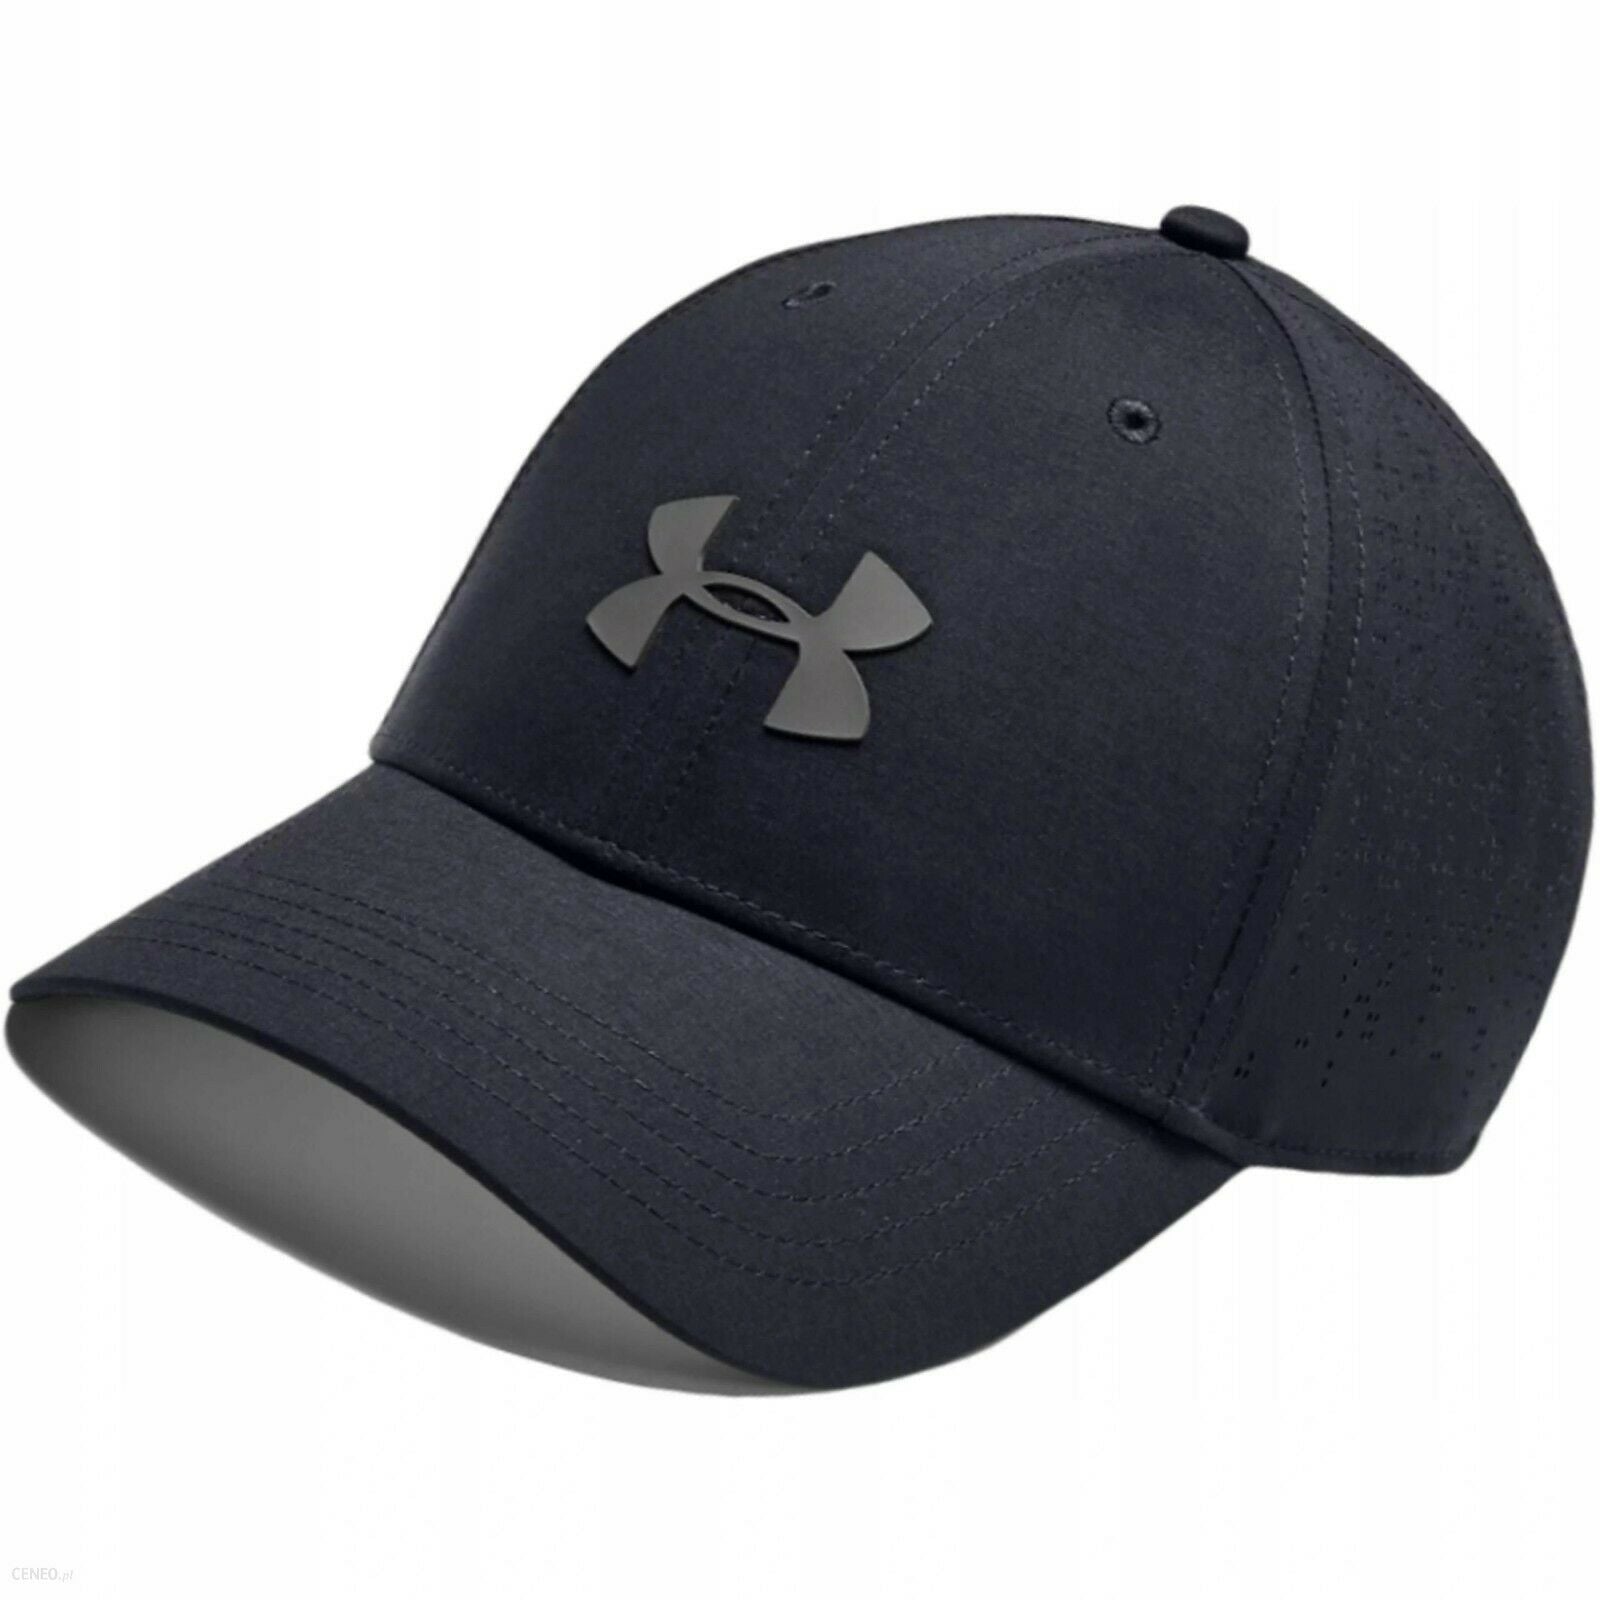 Under Armour Women's Elevated Baseball Golf Cap Adjustable Caps Sports Hat - Valley Sports UK